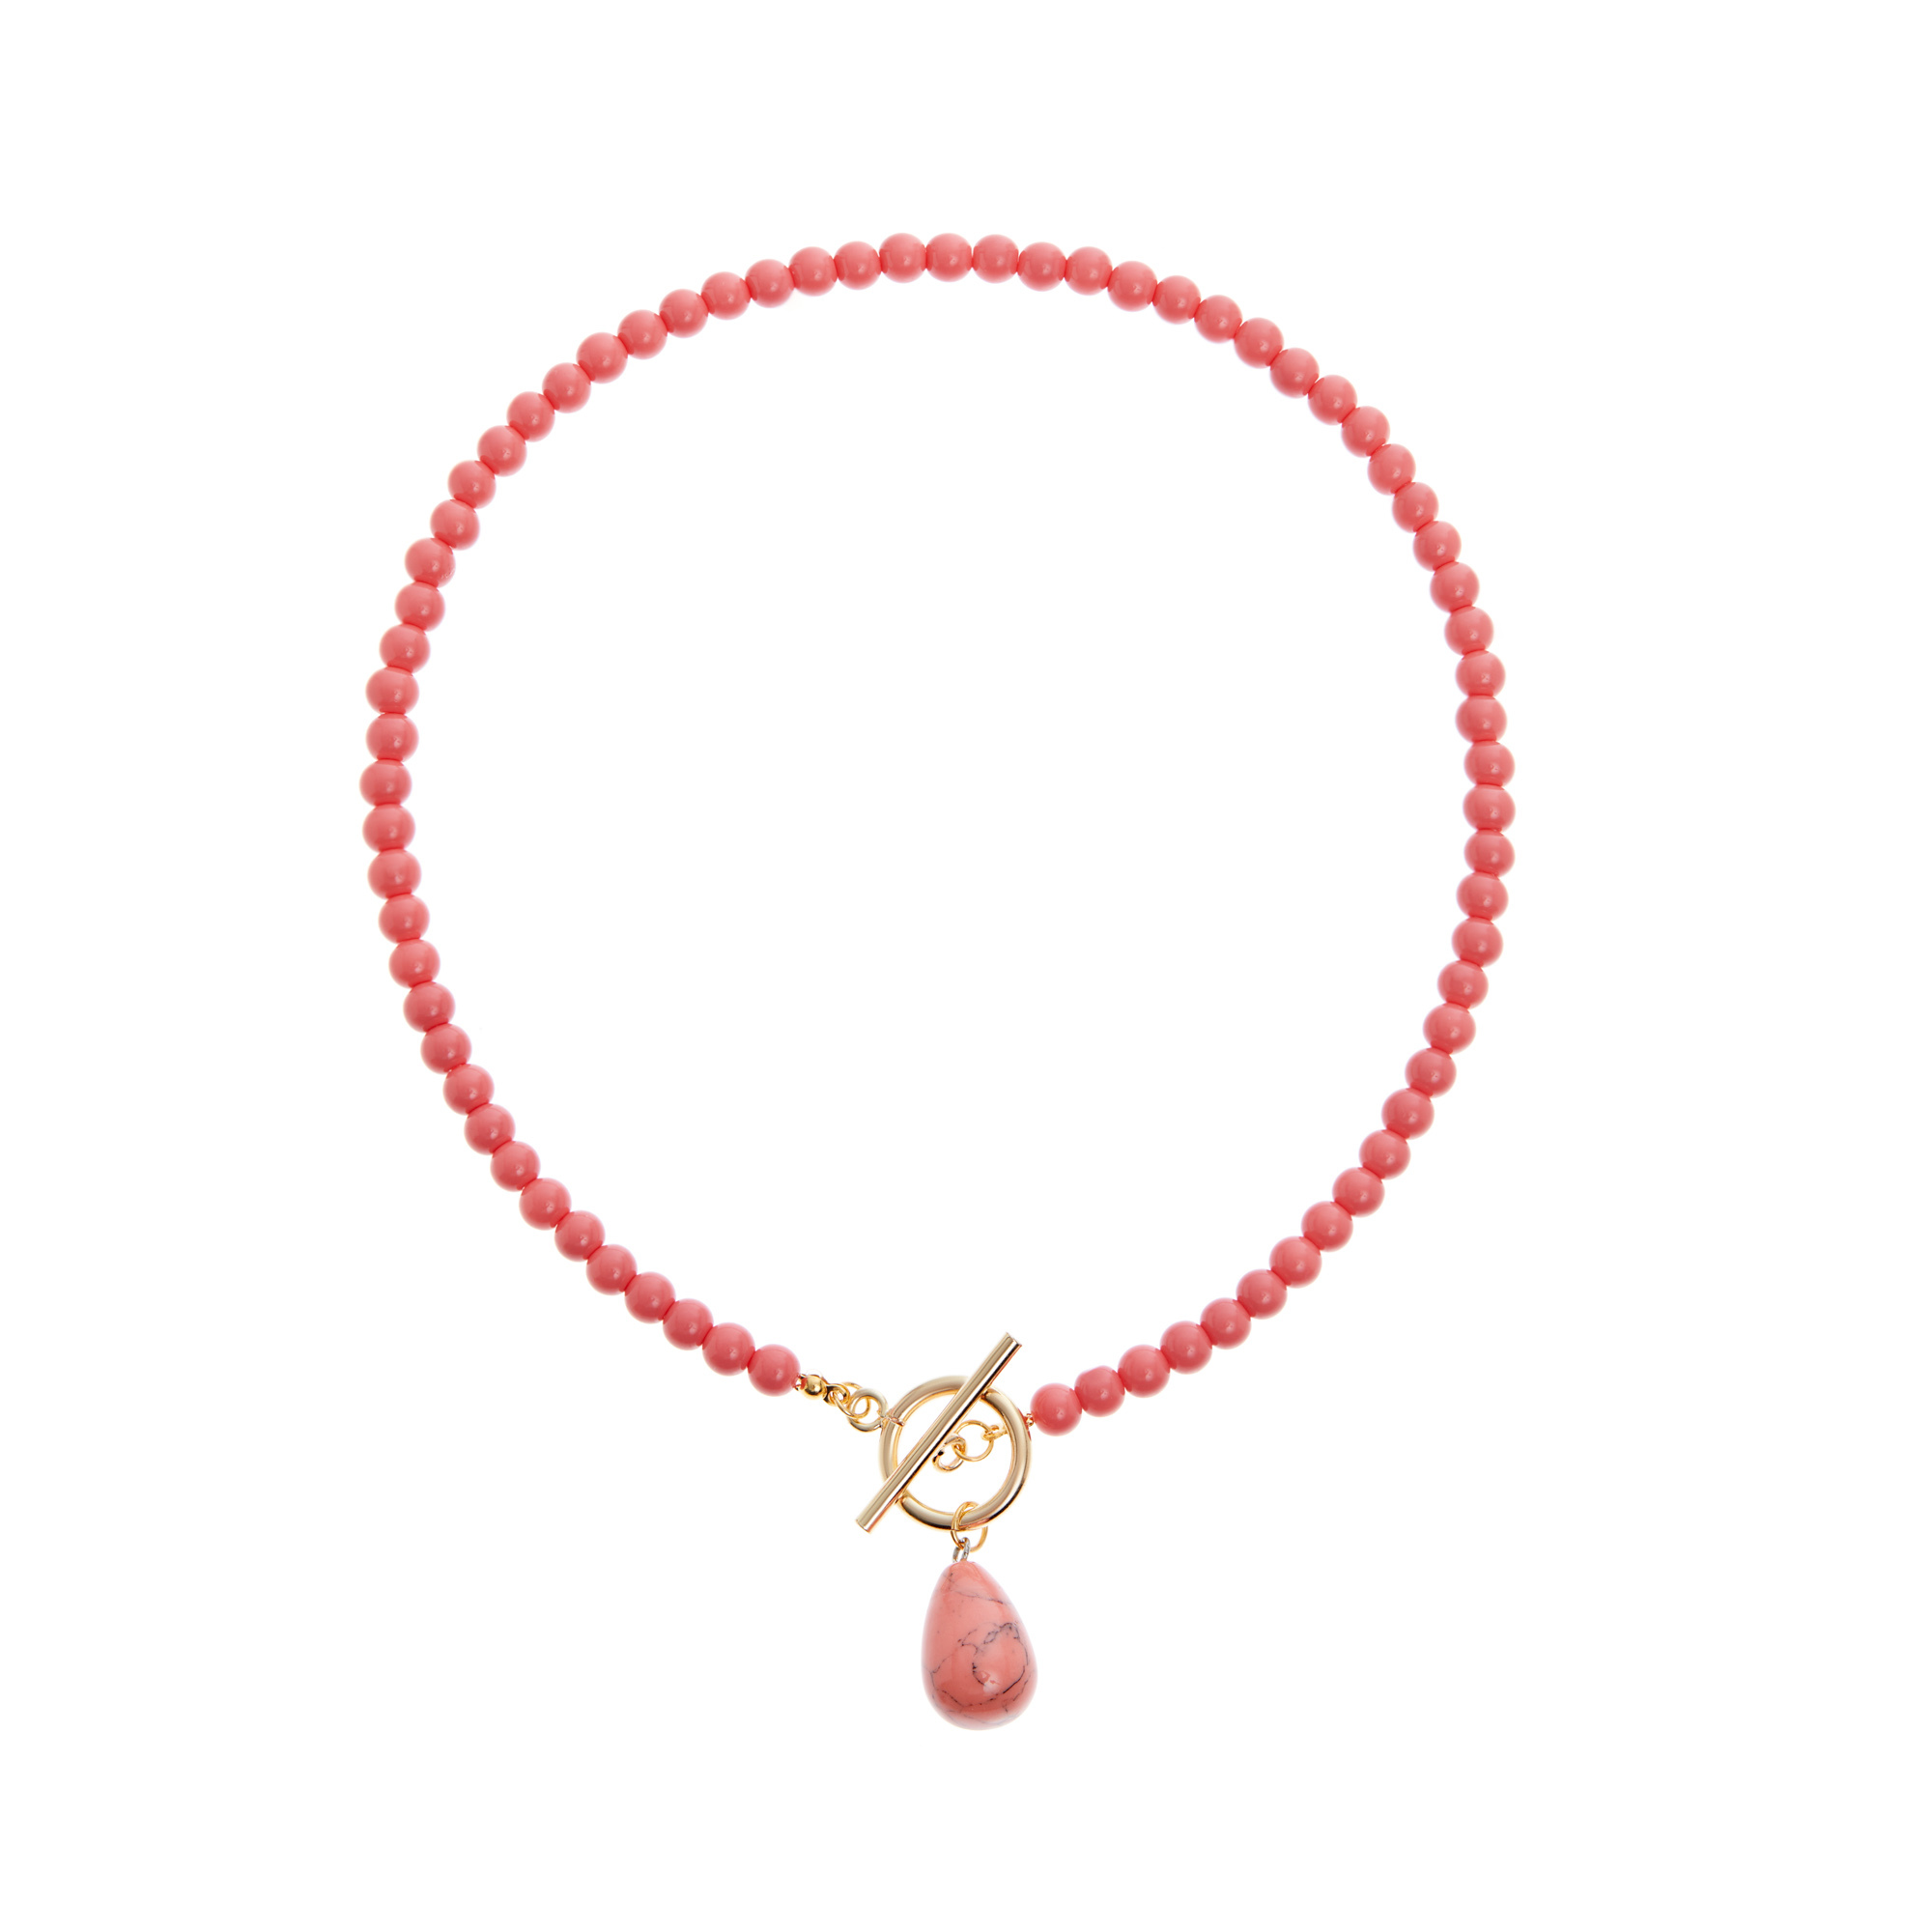 HOLLY JUNE Колье Drop Necklace – Coral holly june колье joyfull necklace